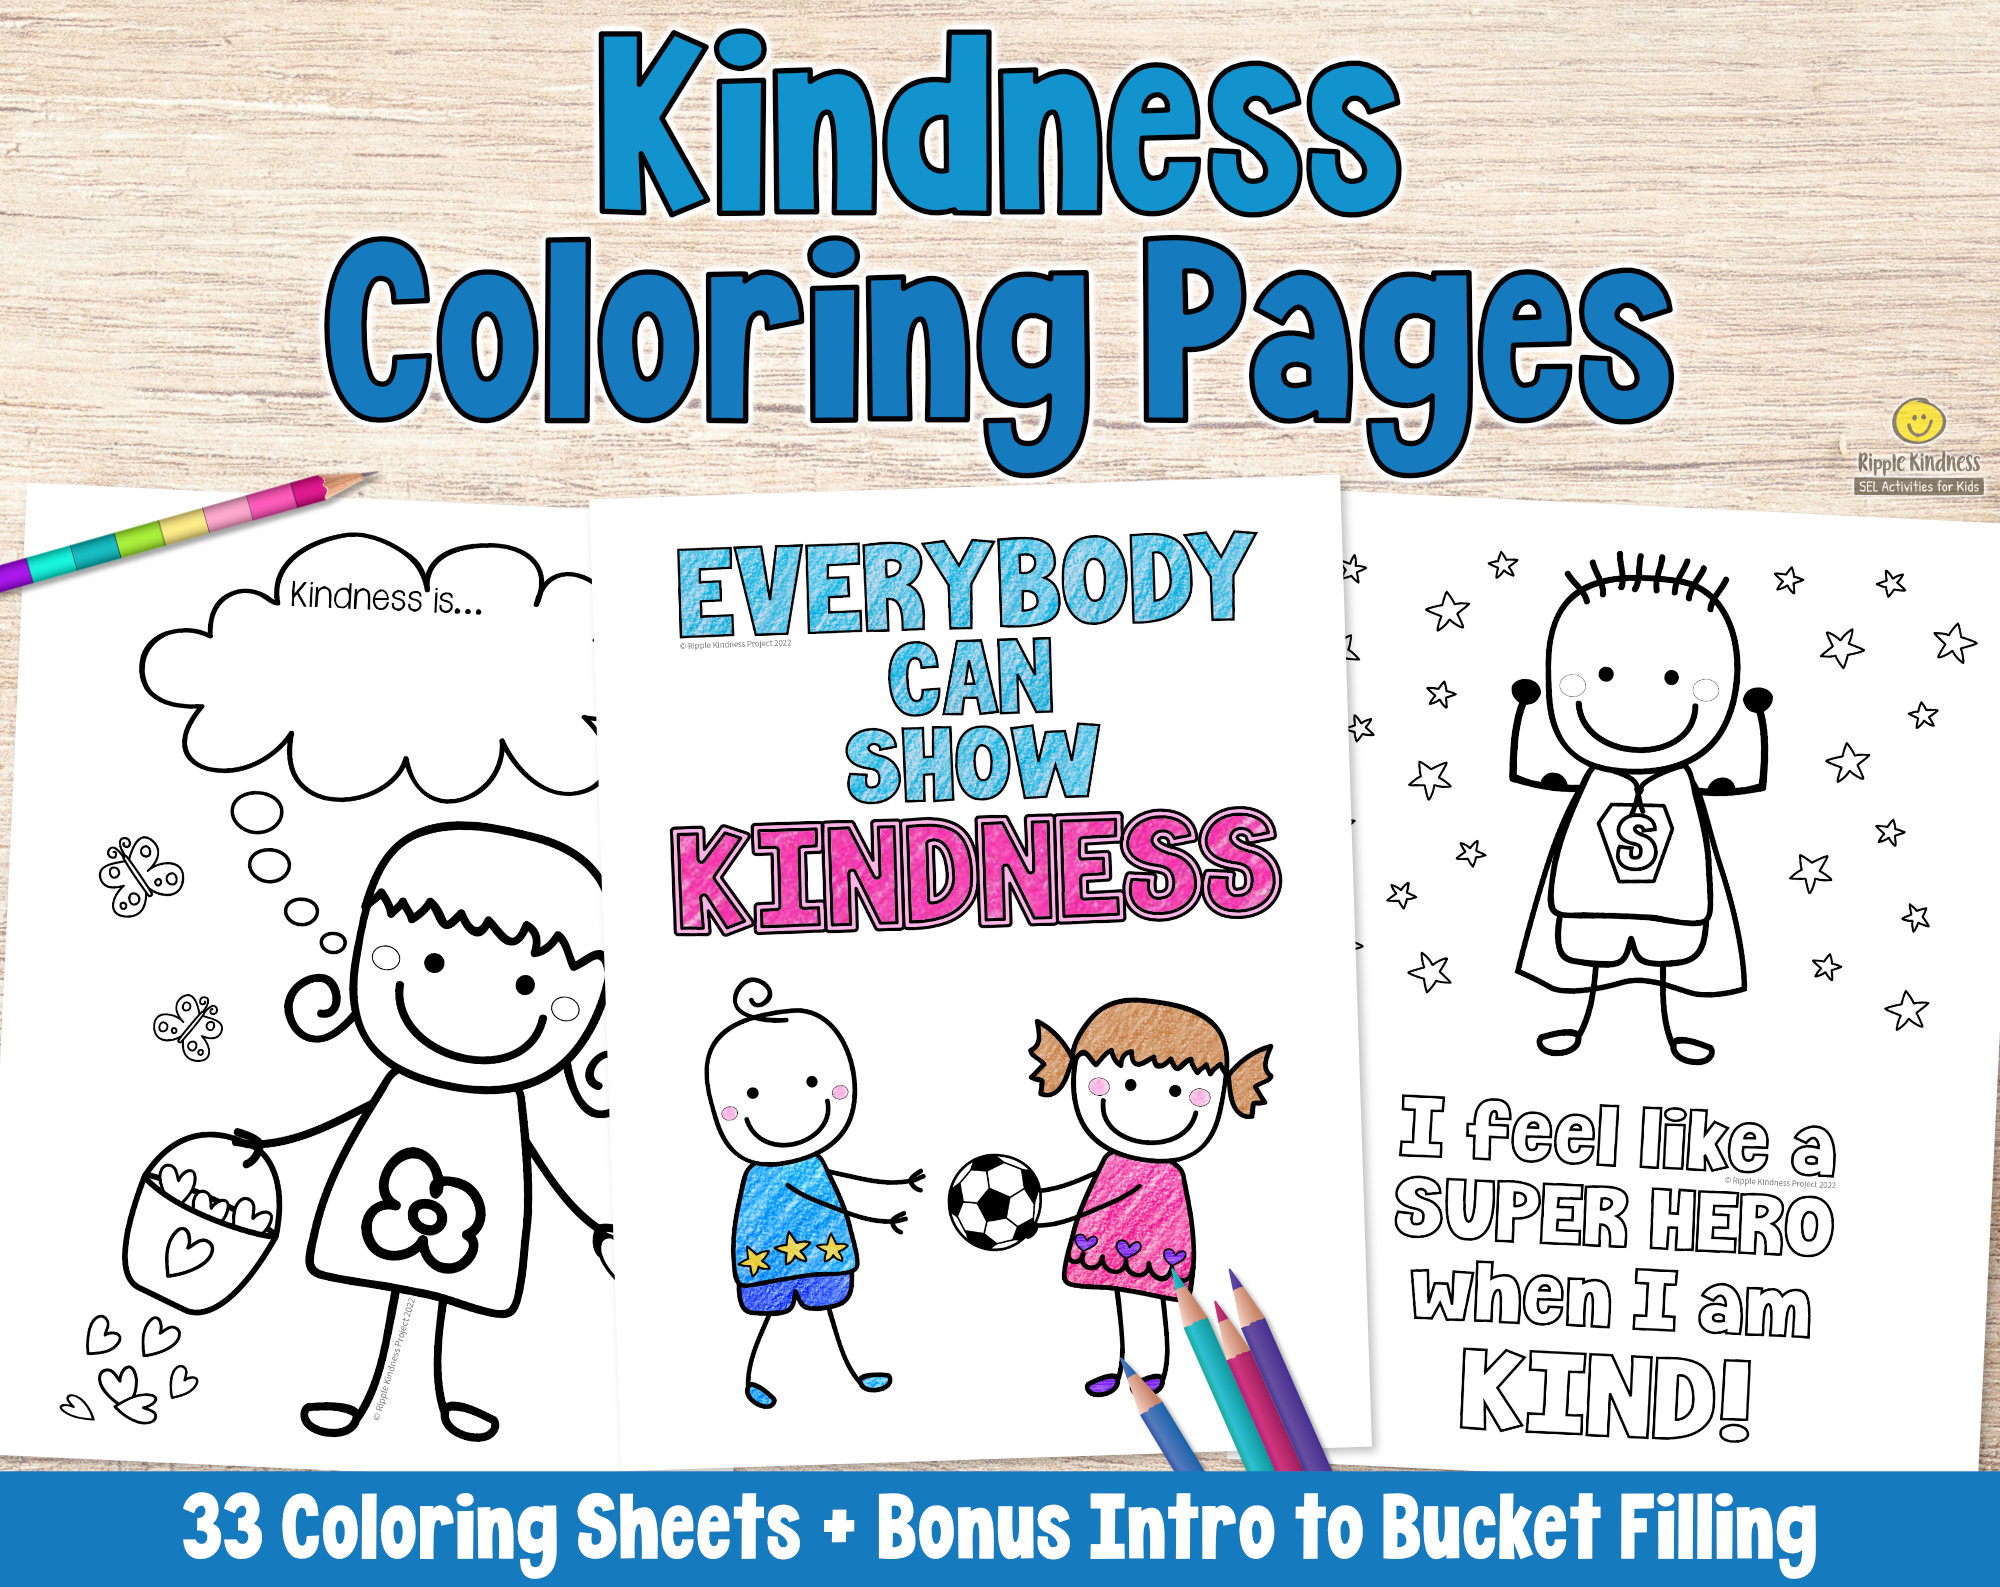 Printable kindness coloring pages for kids growth mindset worksheets or art project kindness day activity